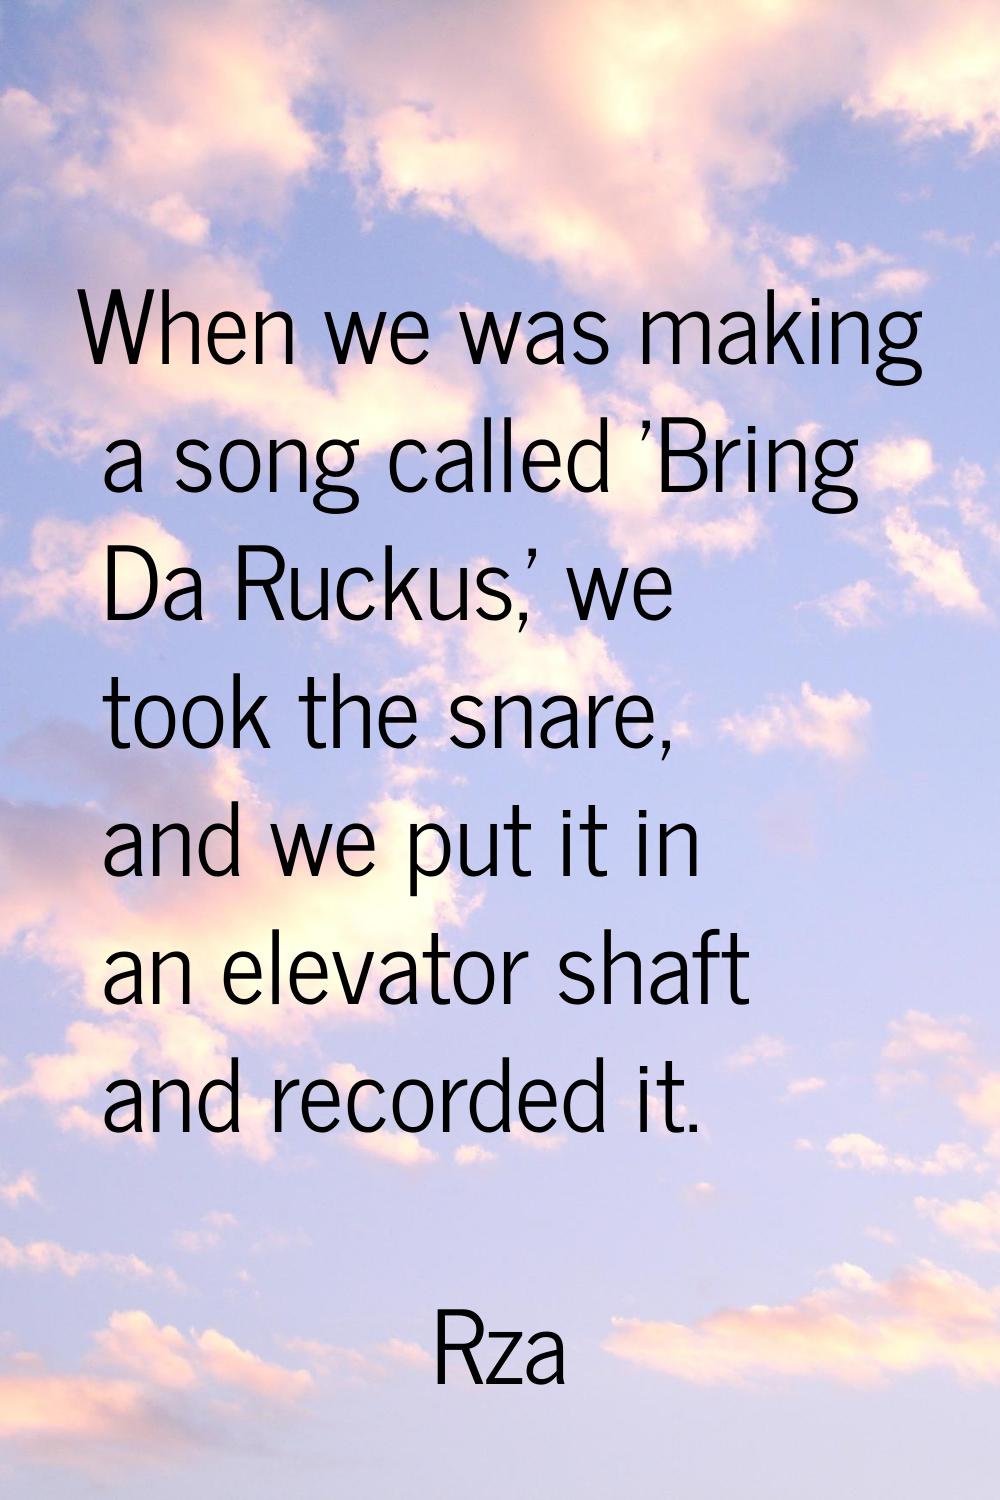 When we was making a song called 'Bring Da Ruckus,' we took the snare, and we put it in an elevator